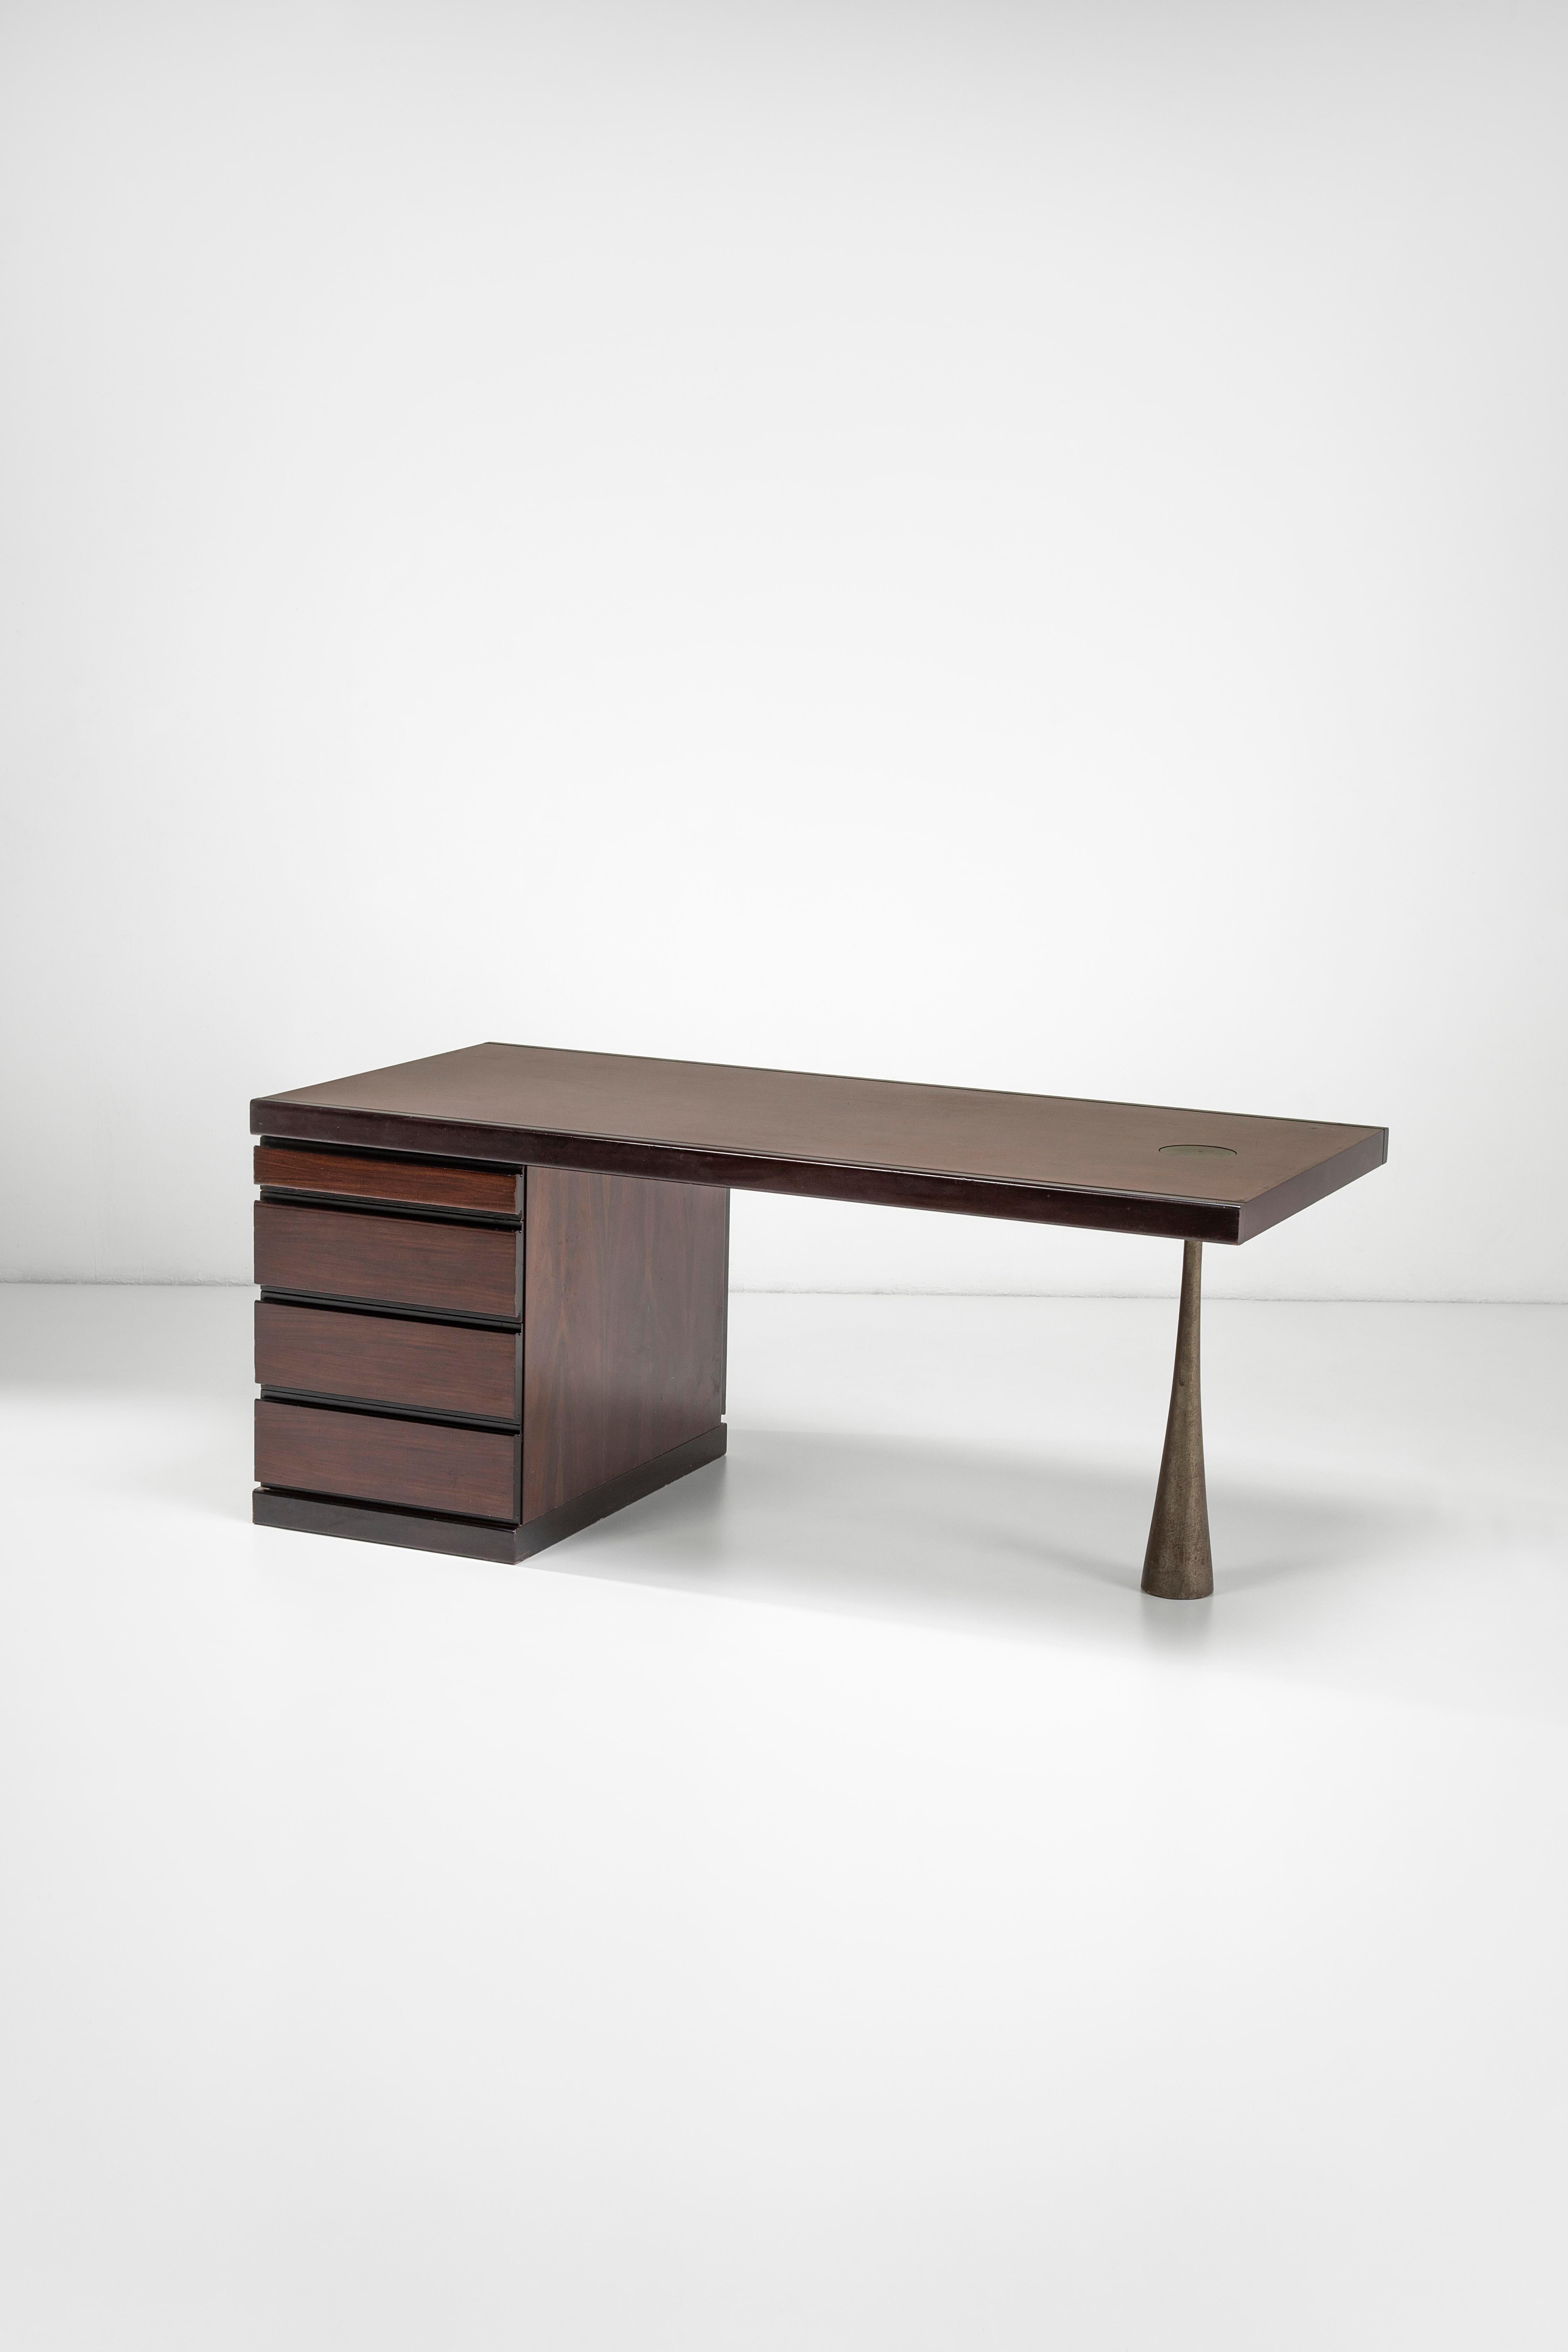 Rare desk designed by Angelo Mangiarotti. This elegant and material piece recalls the designer's style by infusing into a new concept elements already used for other furniture created for La Sorgente dei Mobili, such as round or rectangular tables.